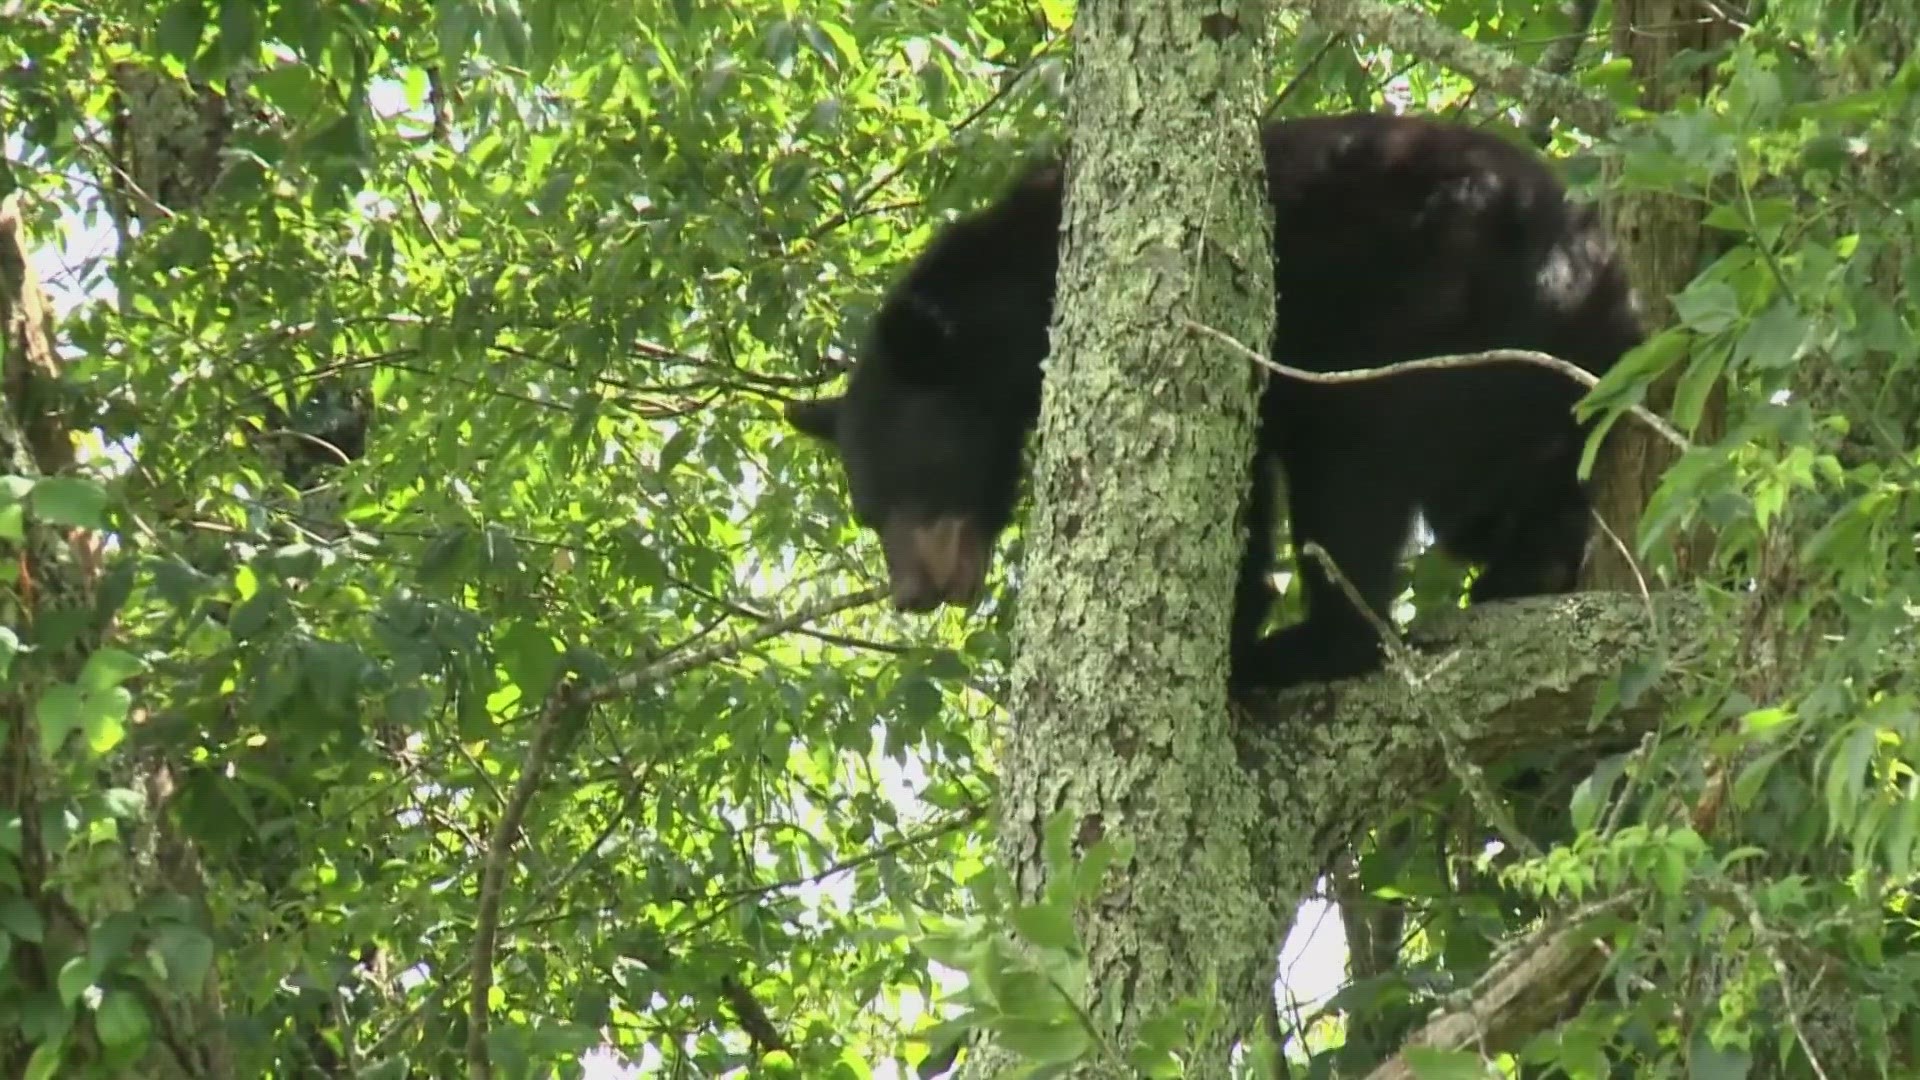 The TWRA said they receive more calls around this time about bear sightings. They want you to be aware of the things you do that attracts them.